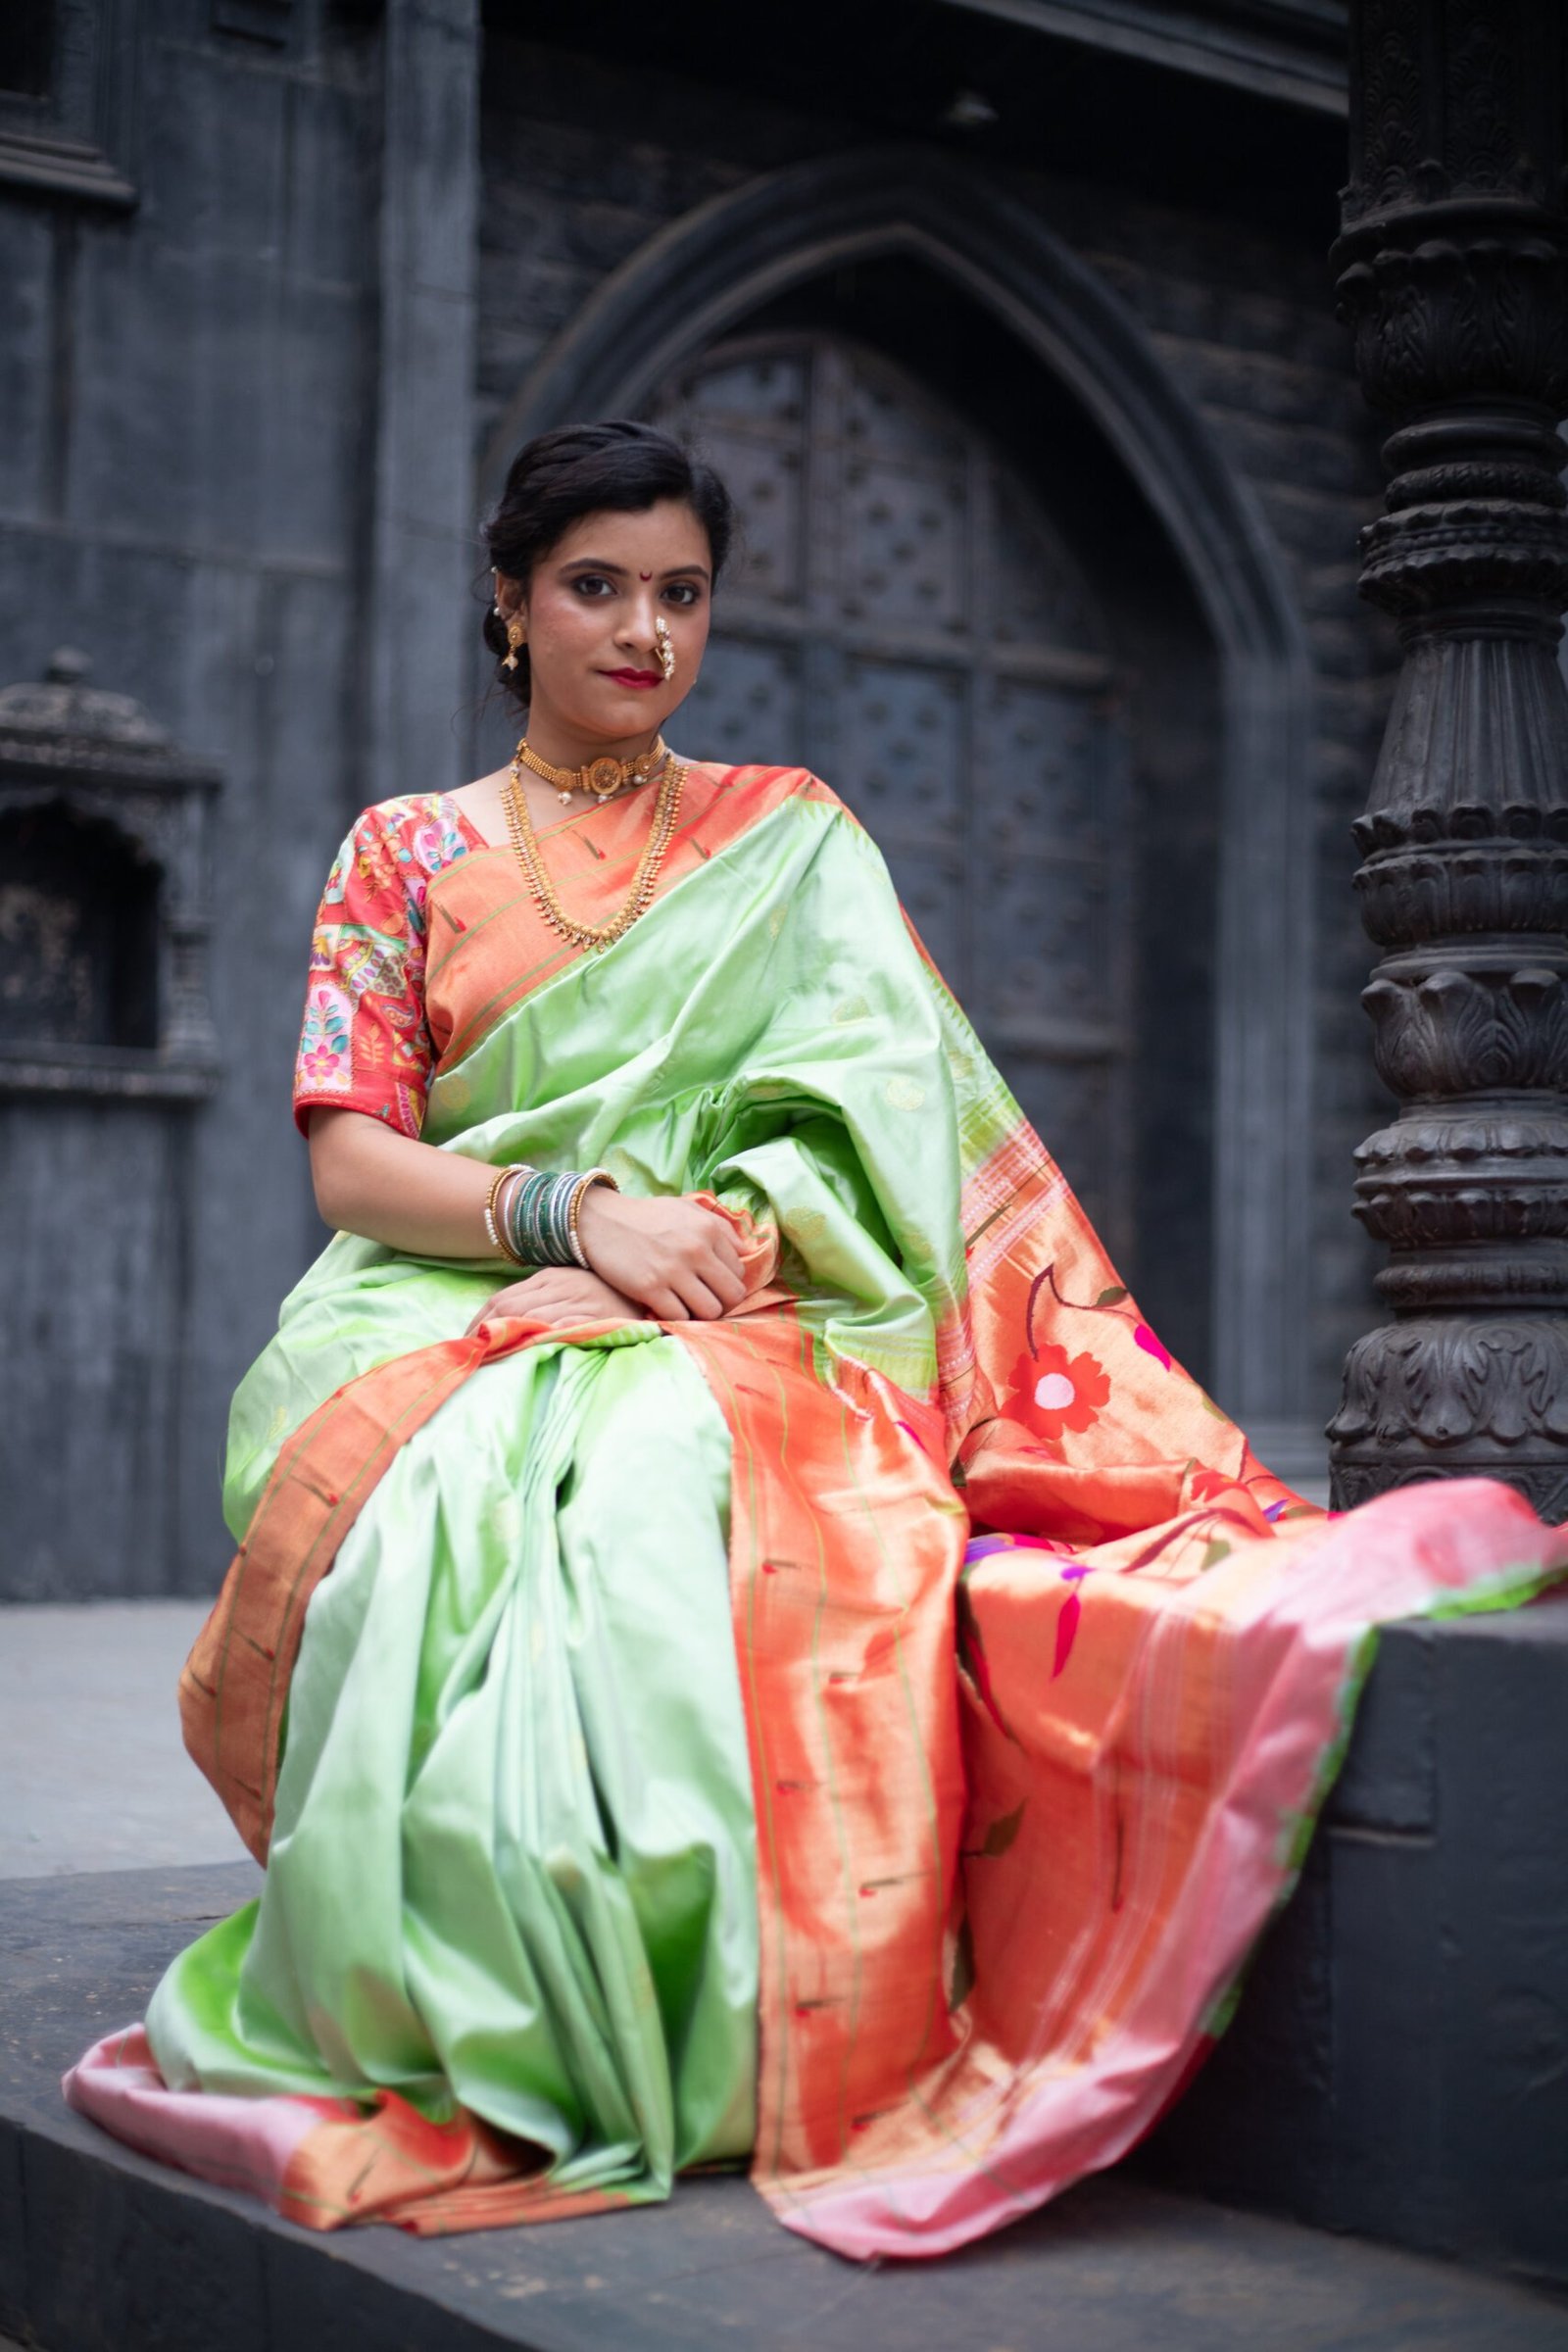 Get the Perfect Peshwai Look for Your D-day & Look Gorgeous